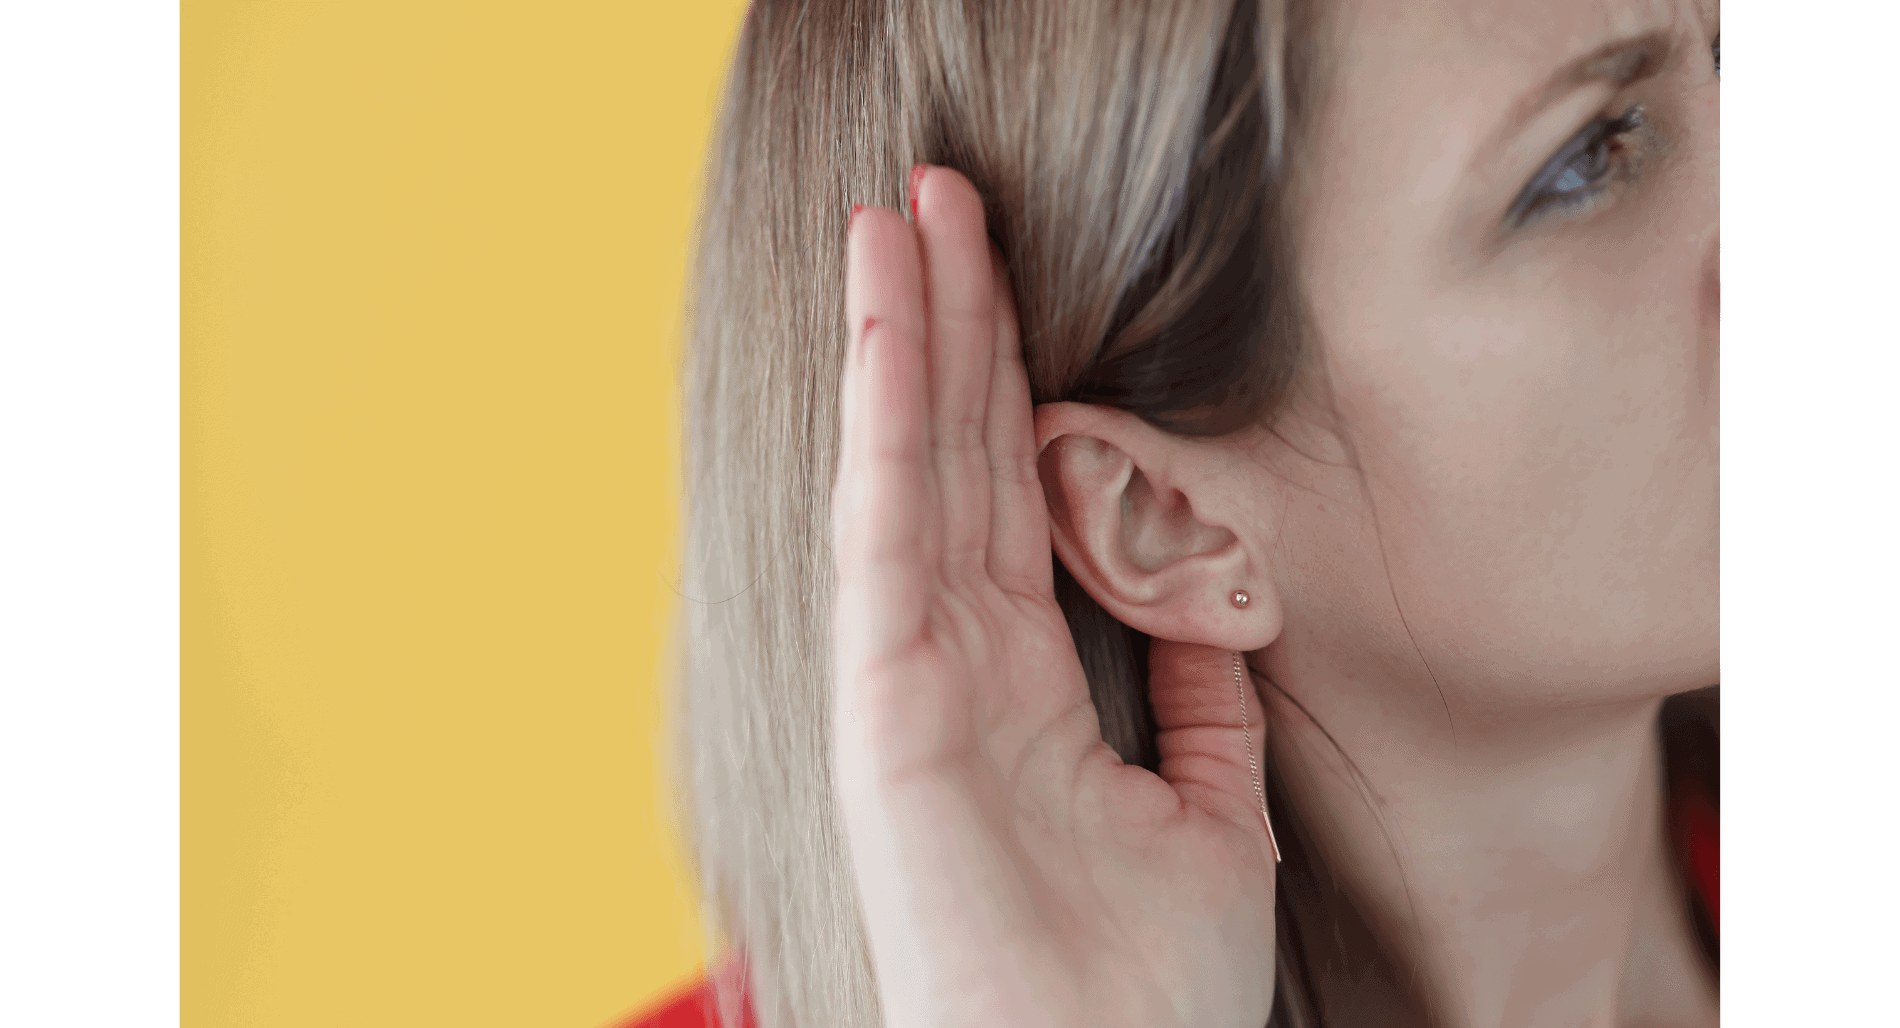 Featured image for “Signs You Should Get a Hearing Test”